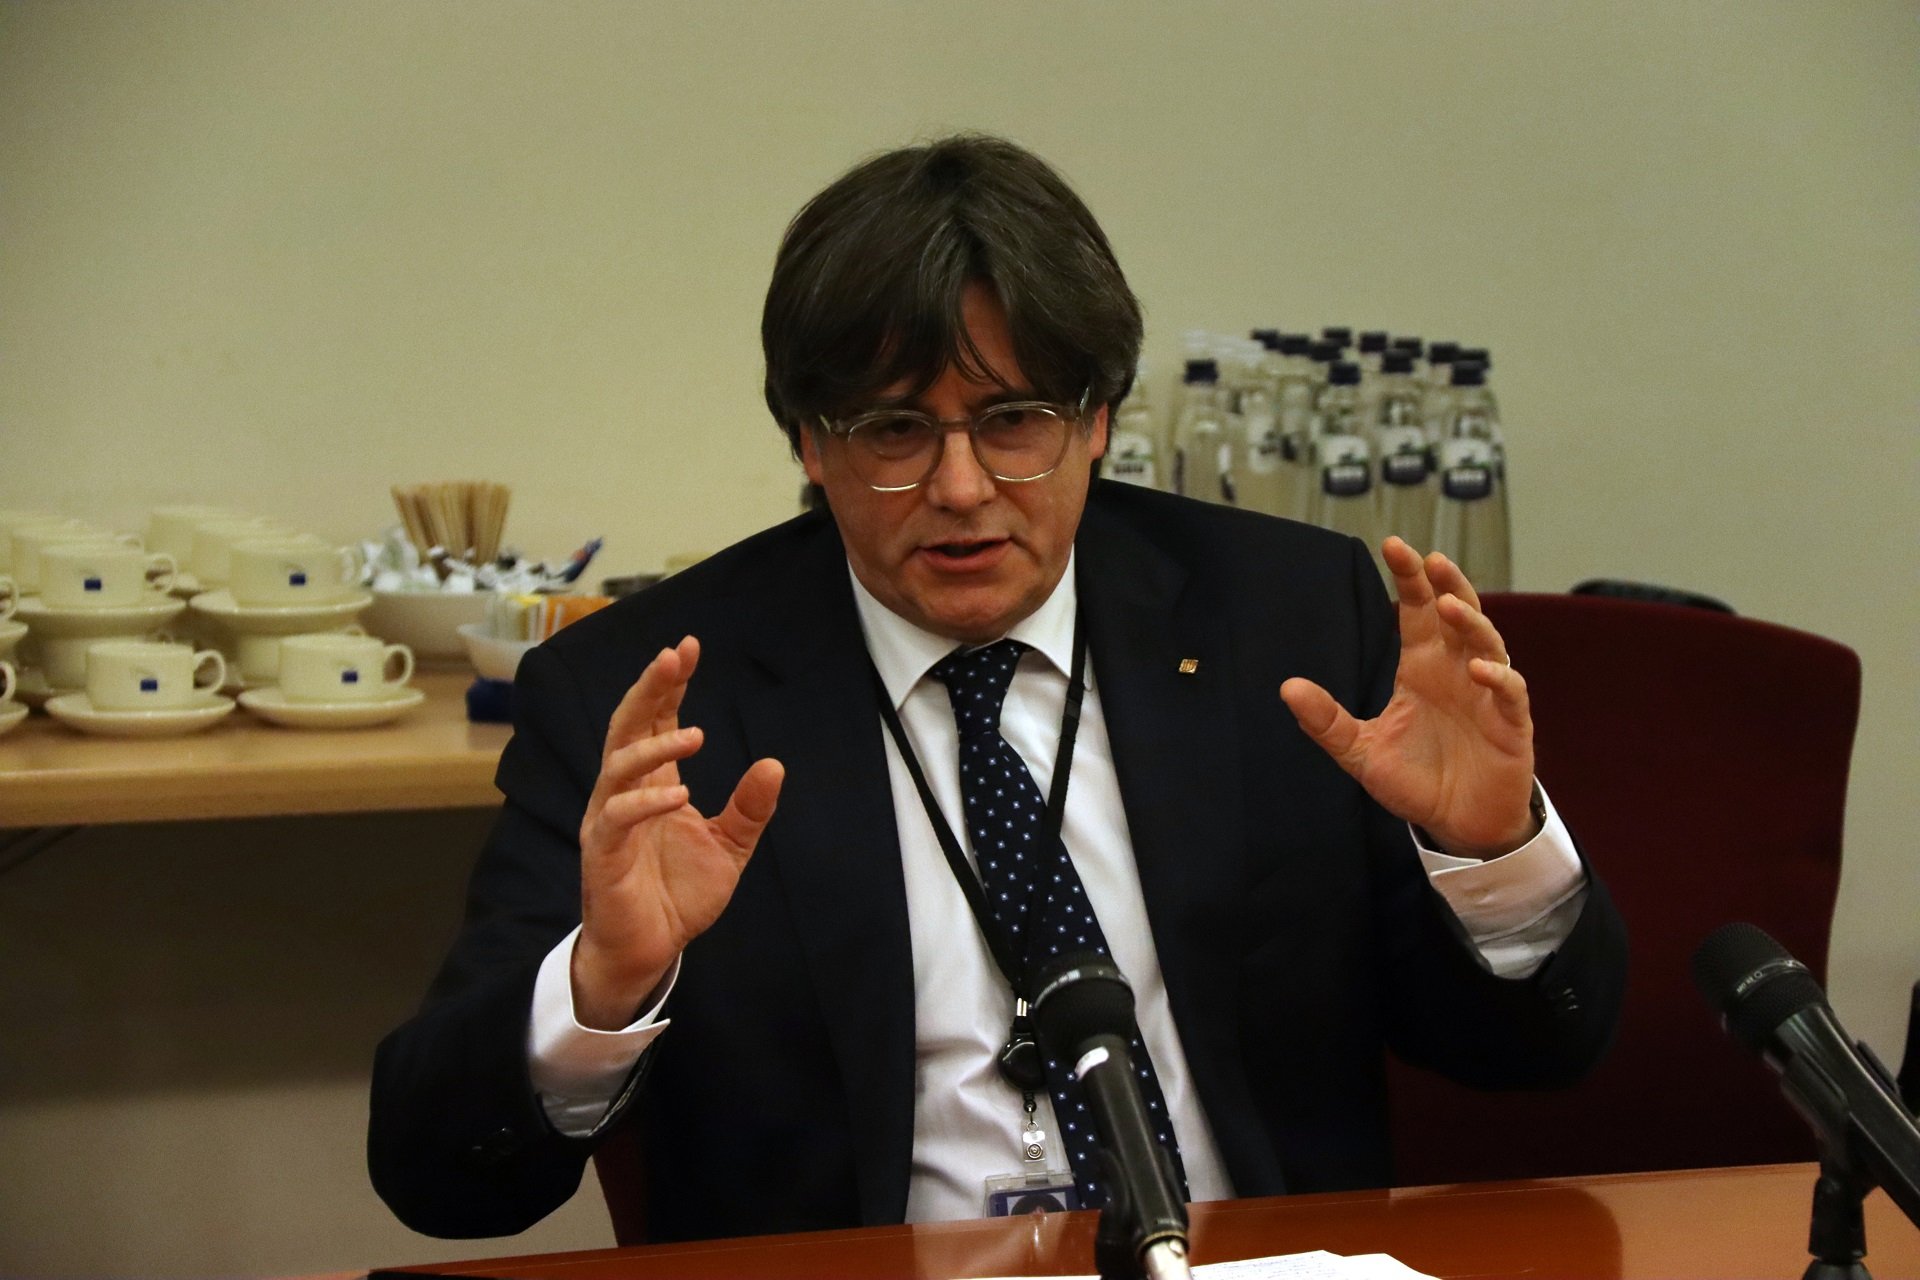 Carles Puigdemont denounces that Clarity Agreement "does not have the necessary consensus"